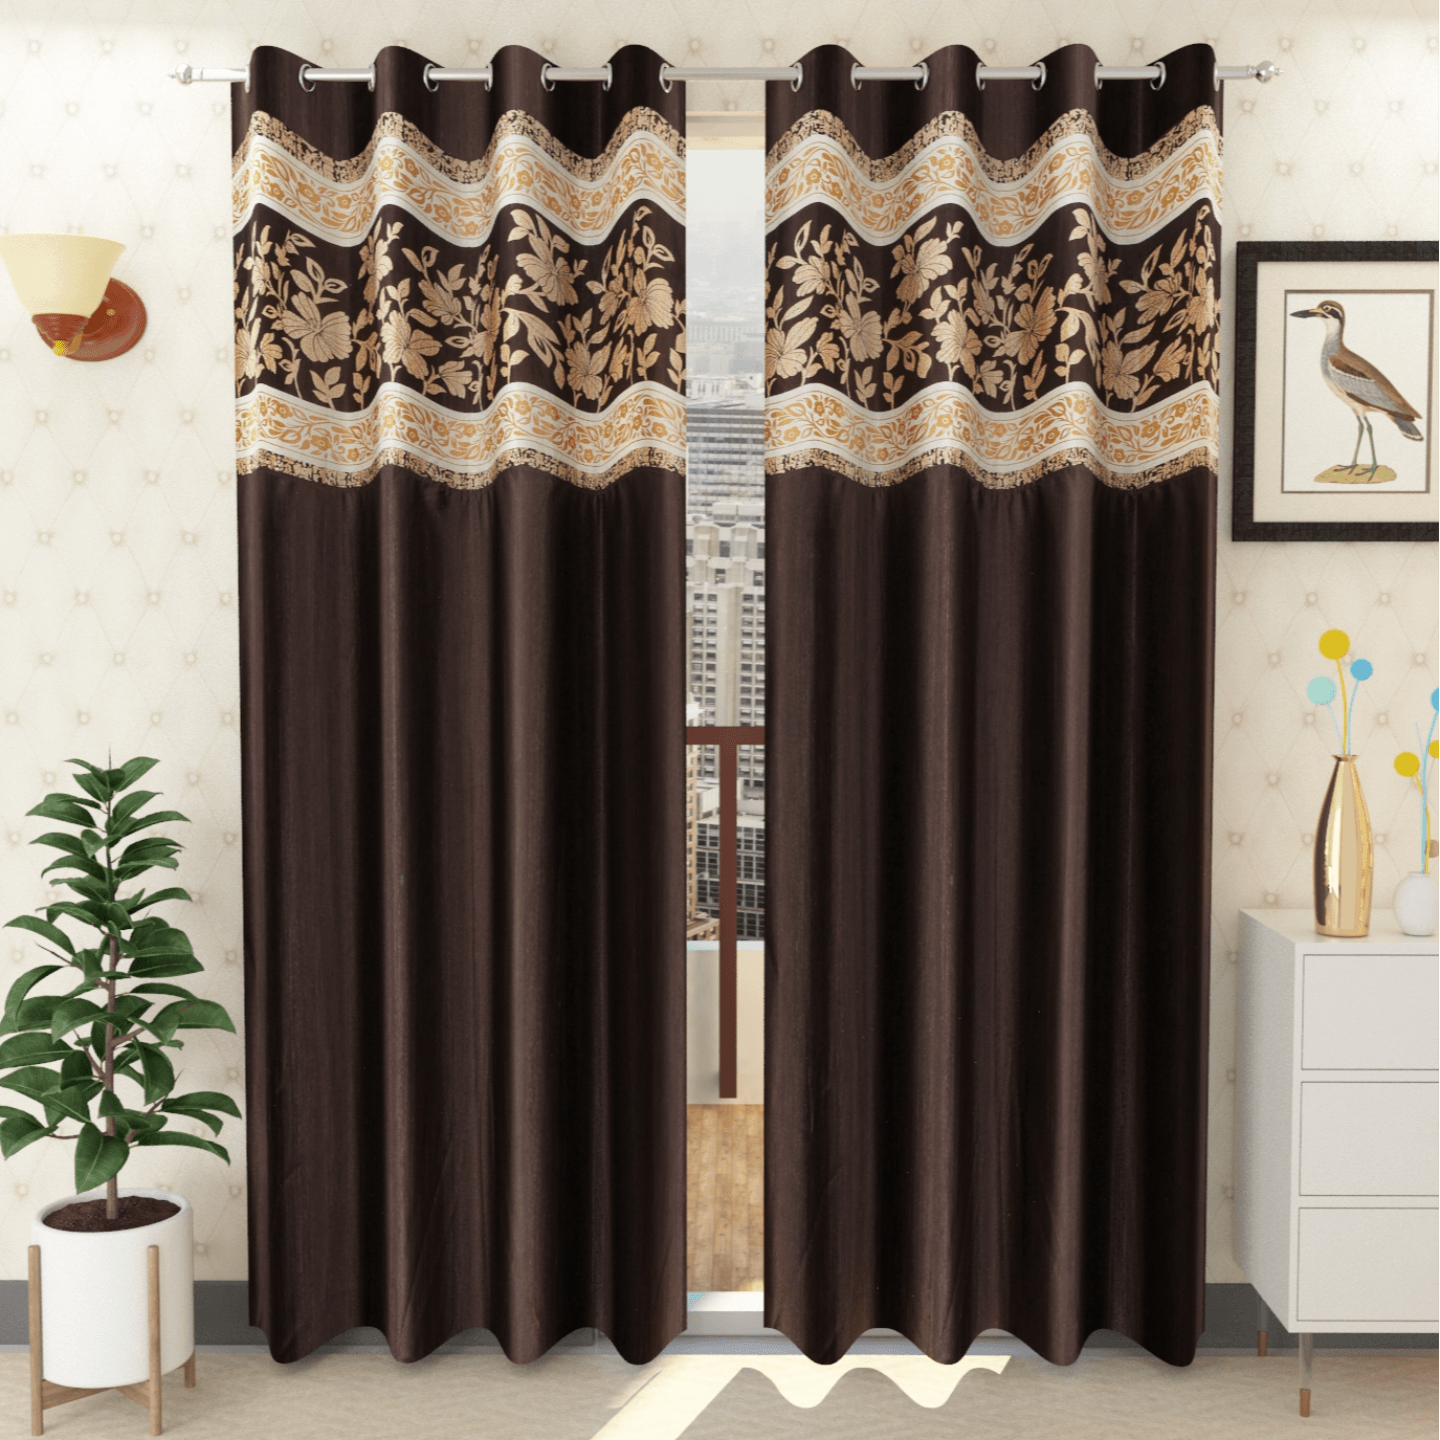 Handtex Home Patchwork curtain for door 7 feet set of 2pc Coffee color